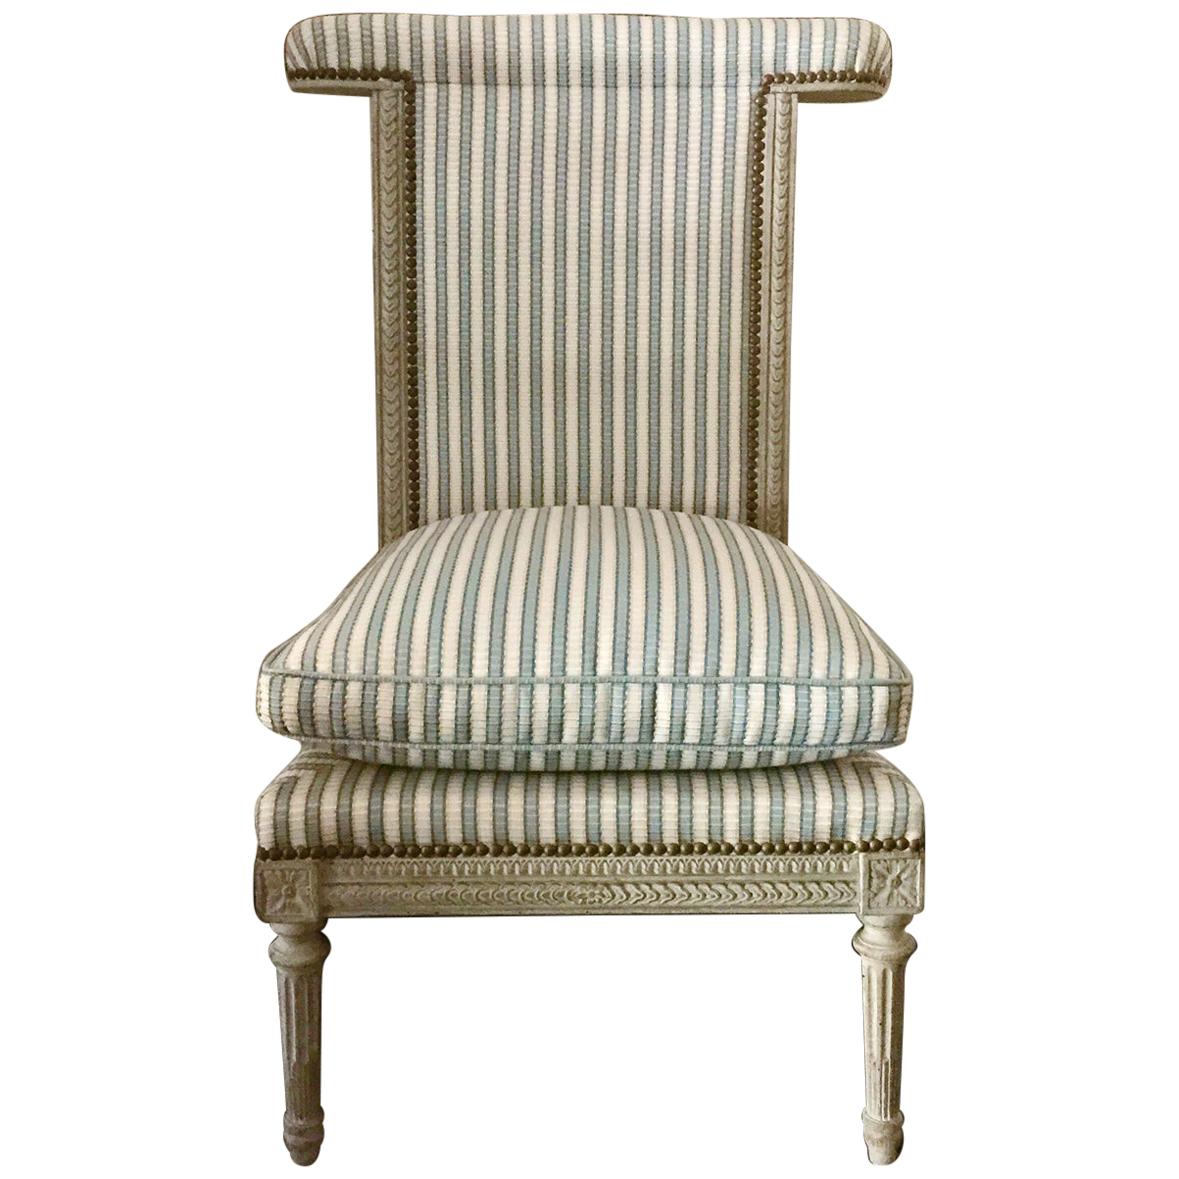 French Louis XVI Style Voyelle/Ponteuse Chair, French Riviera Private Collection